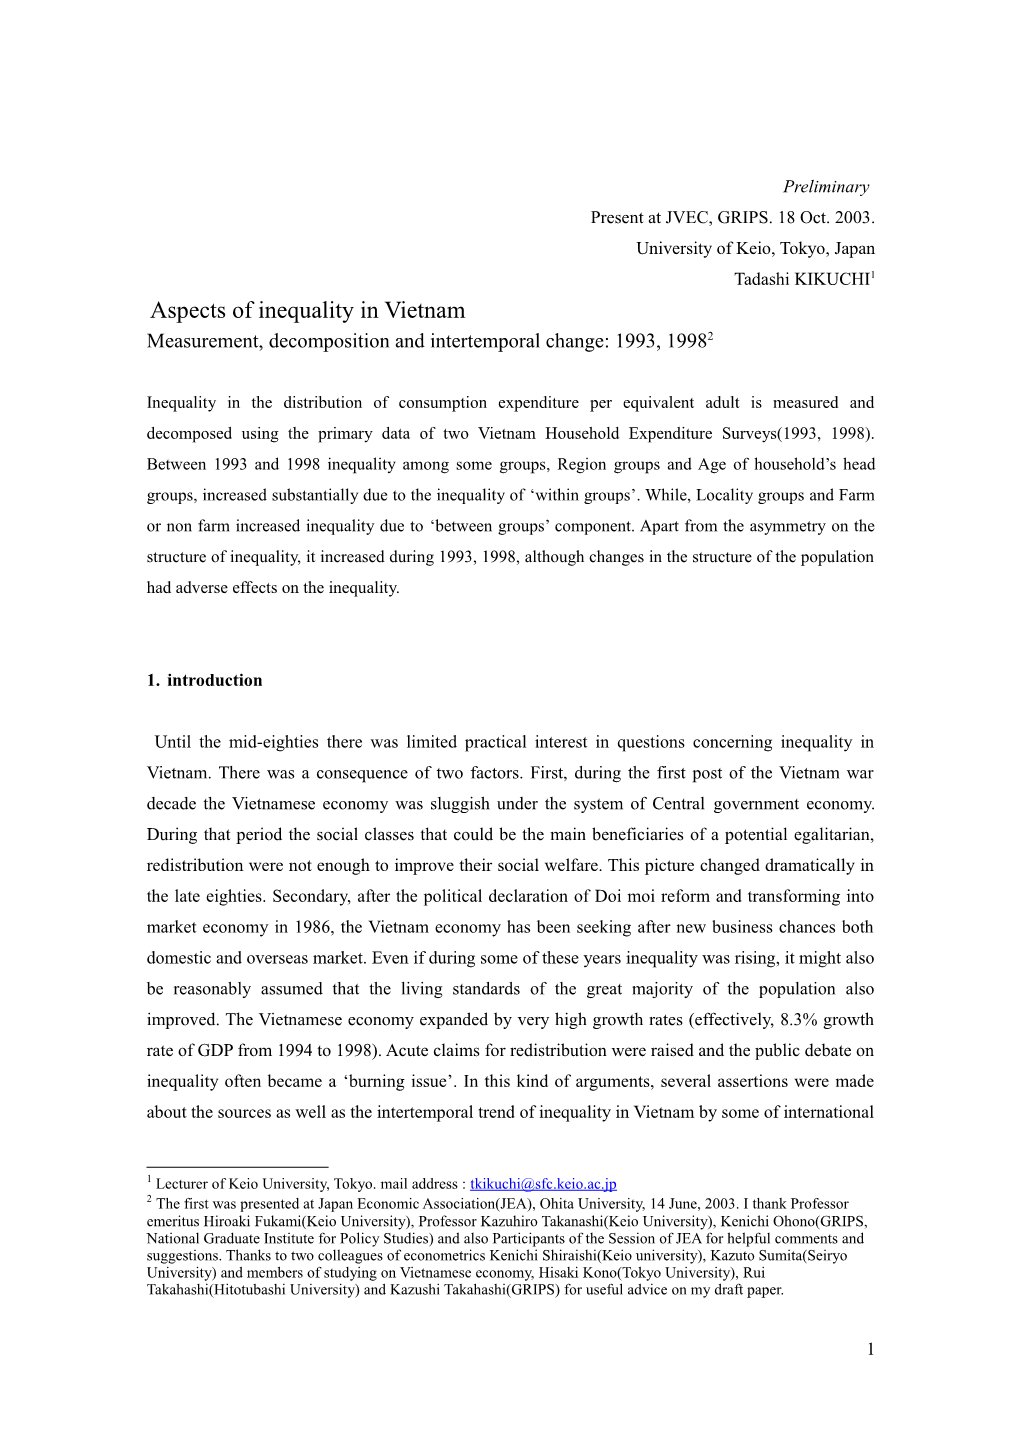 Aspects of Inequality in Vietnam : Measurement, Decomposition and Intertemporal Change